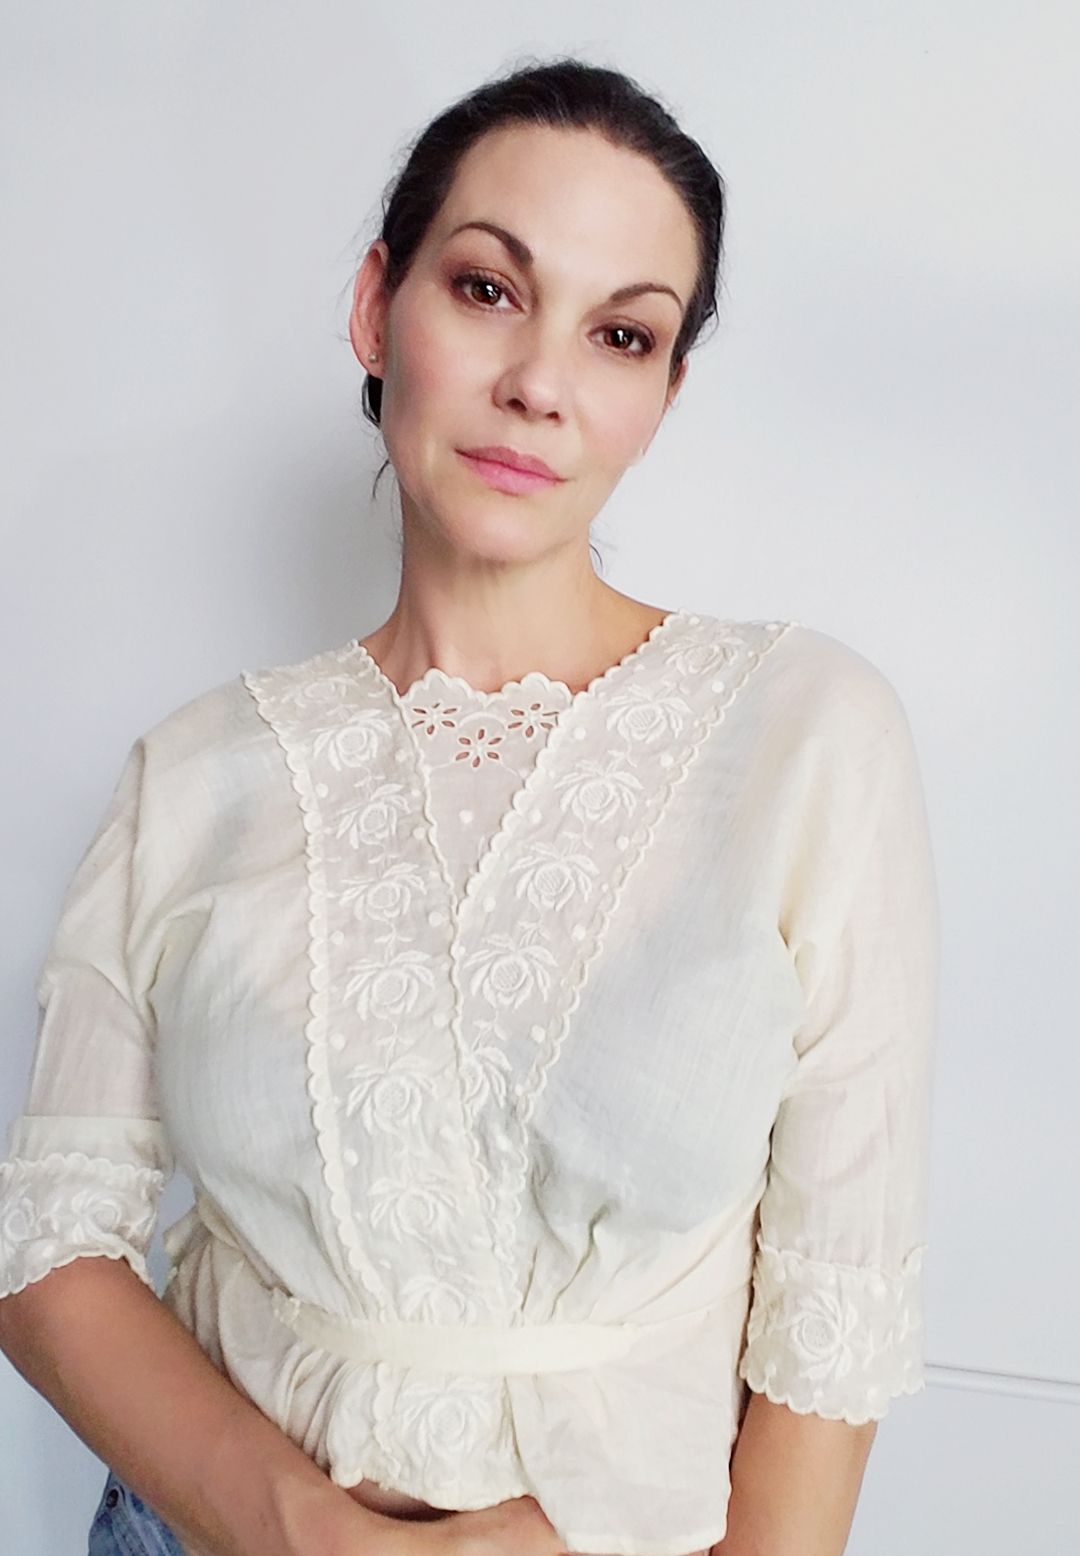 Vintage 1910s Edwardian Ivory Cotton Blouse With Embroidered Lace